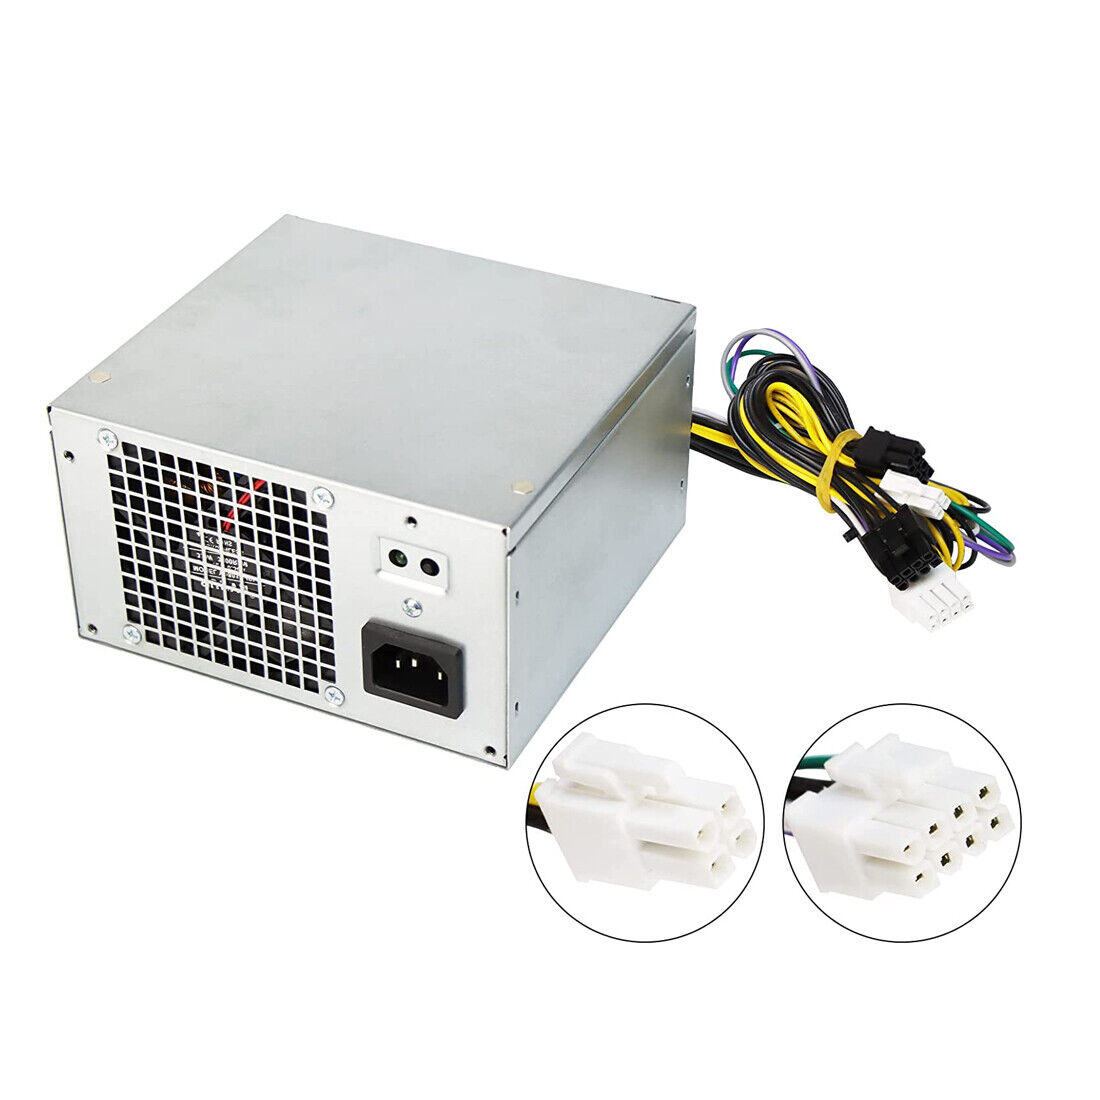 New HK465-11PP T1M43 365W Power Supply For DELL Precision 3620 T3620 T1700 T20